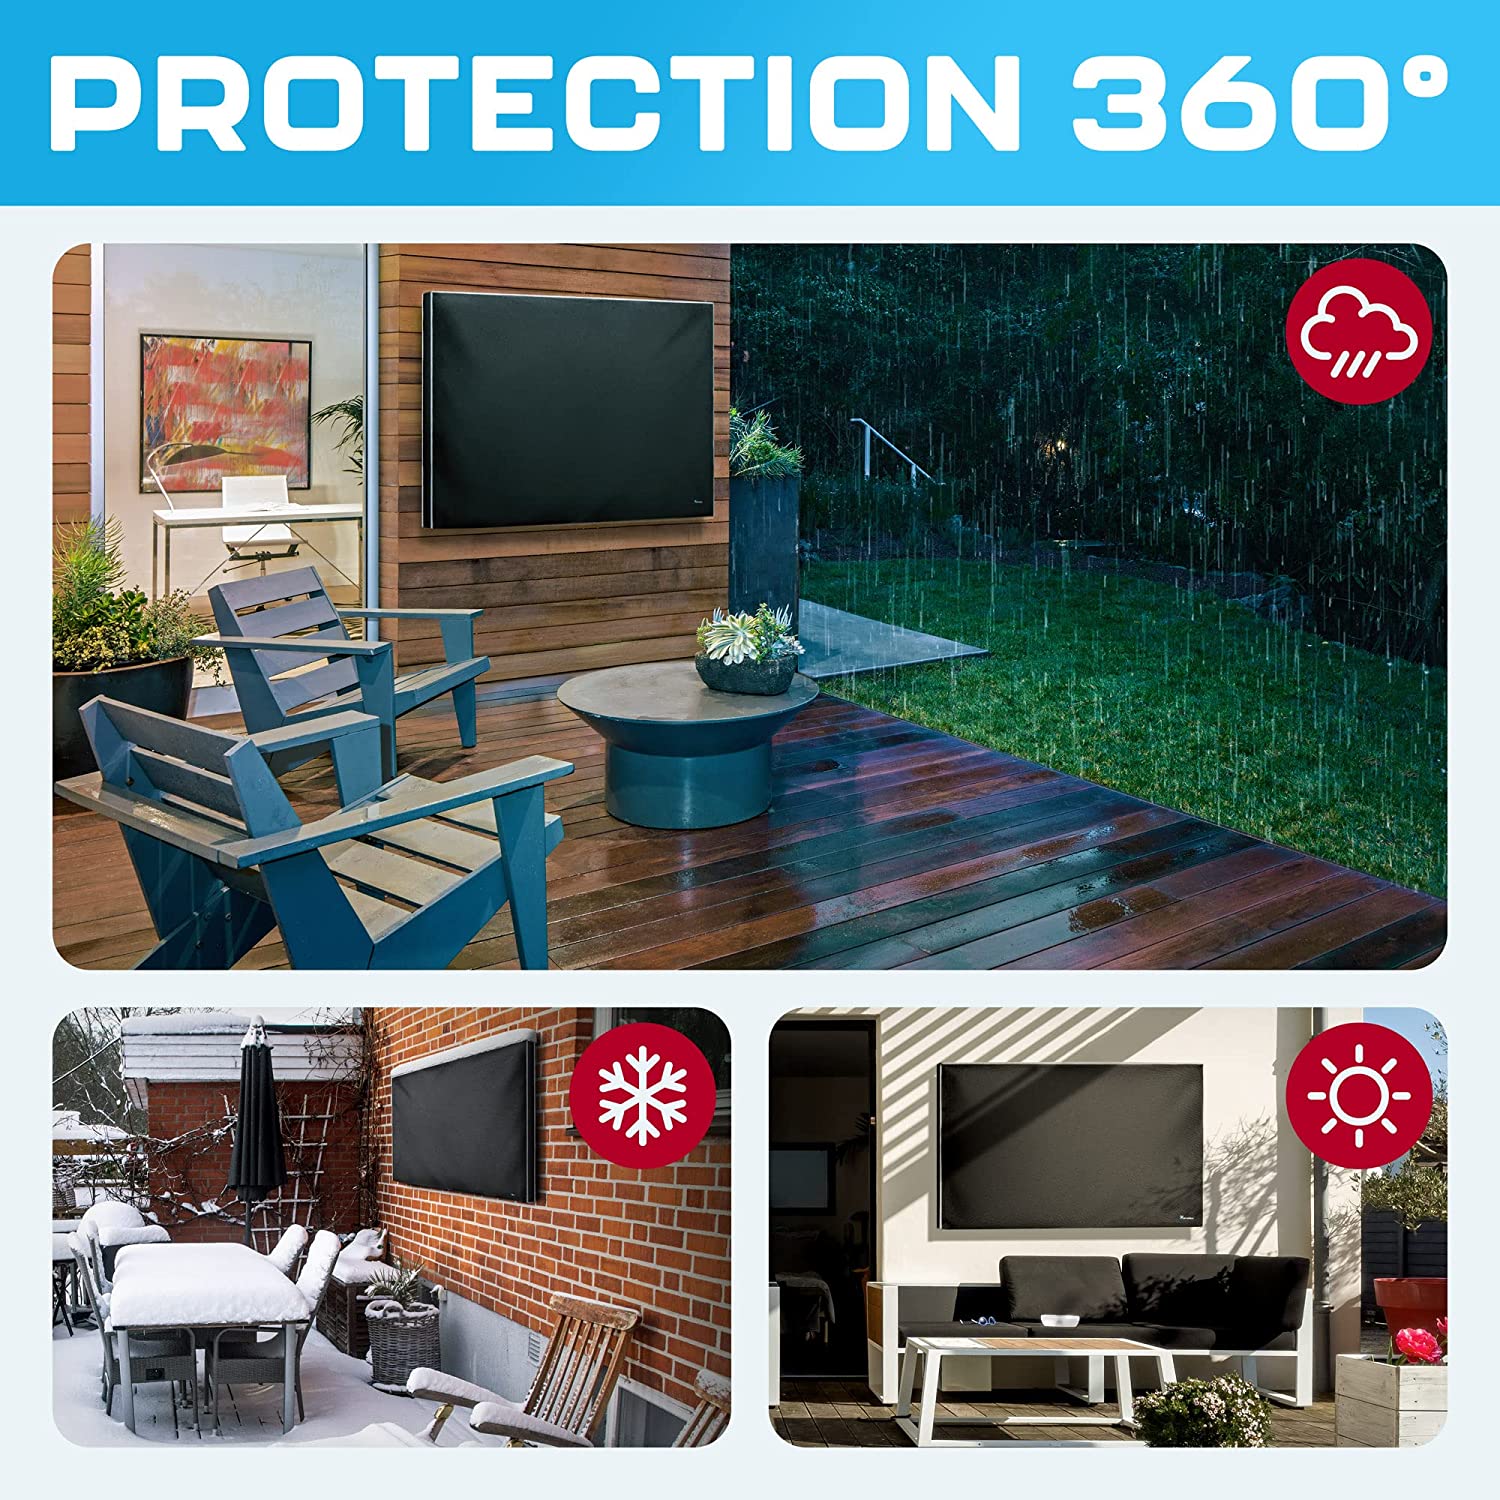 Outdoor TV Cover 86-90 Inch | Waterproof and Weatherproof TV Covers | Outdoor TV Enclosure | Smart Shield TV Screen Protector for Outside TV | Cover for Moving | TV Display Protectors – Gray